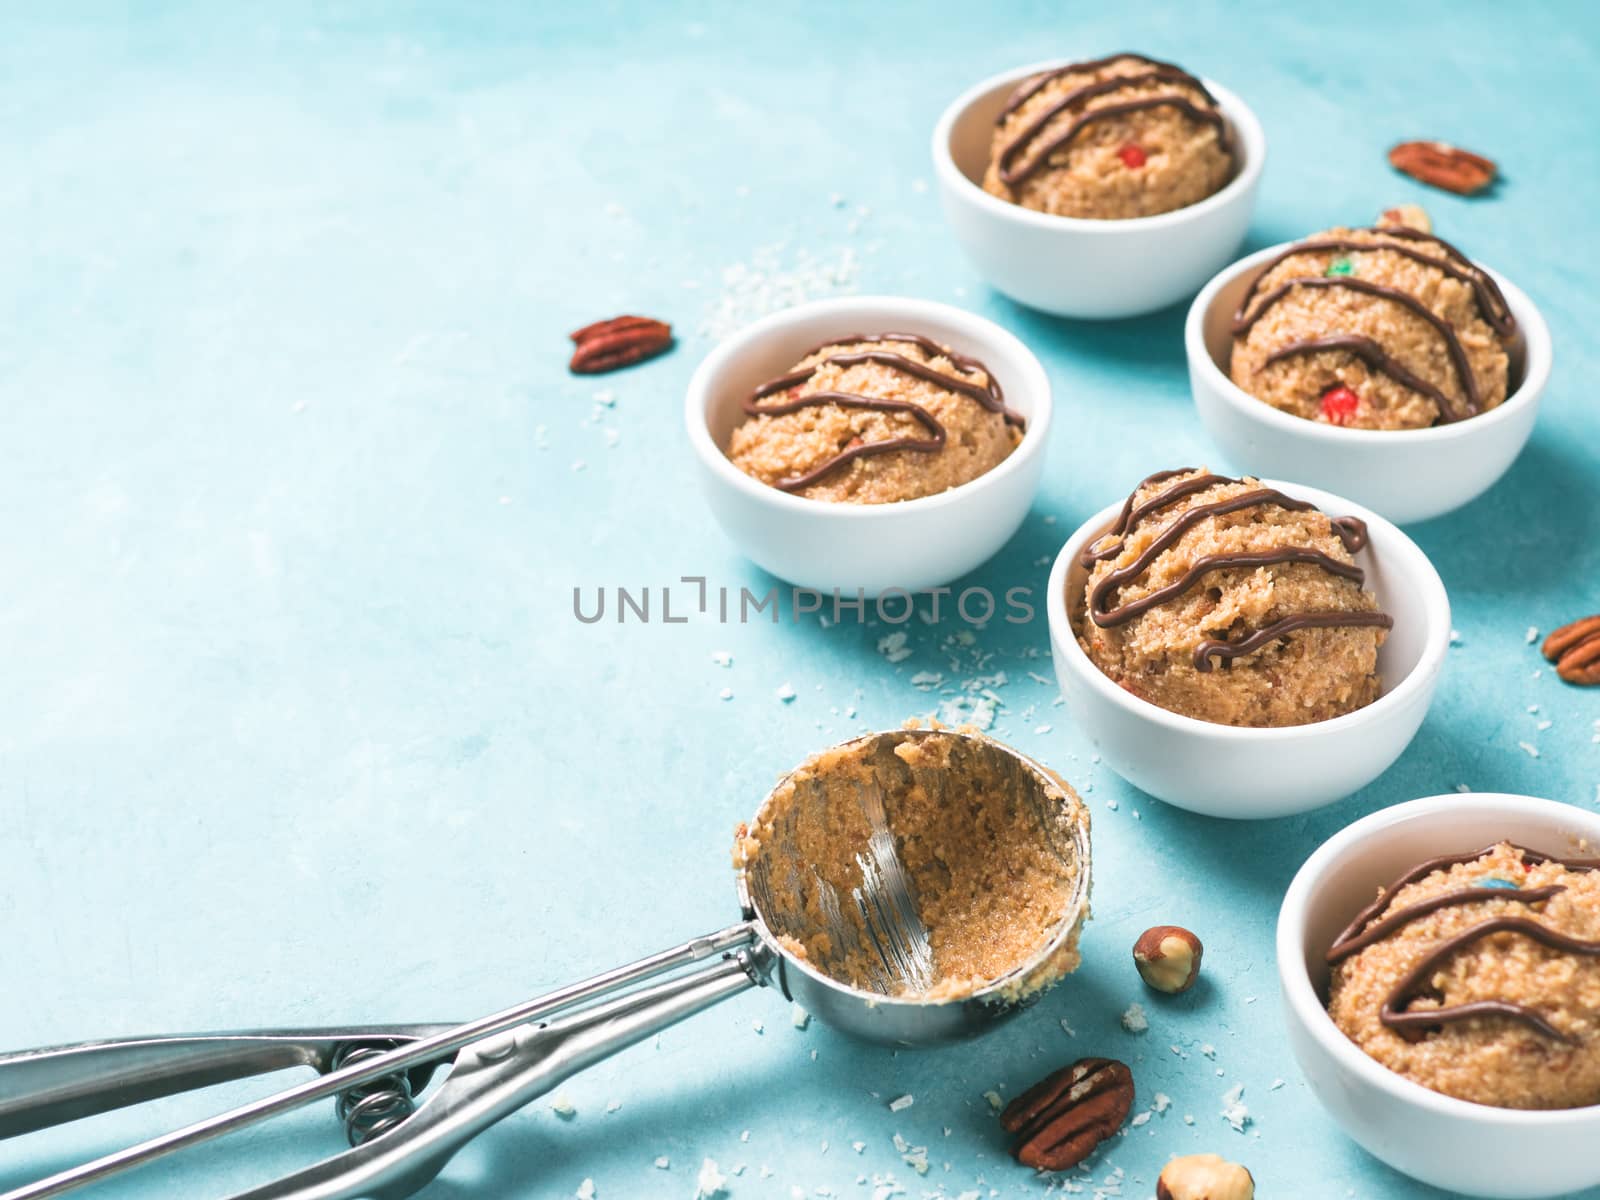 Safe-to-eat raw monster cookie dough in small portion bowl, ice cream scoop and nuts on blue background. Ideas and recipes for kids and toddlers meal. Copy space for text.